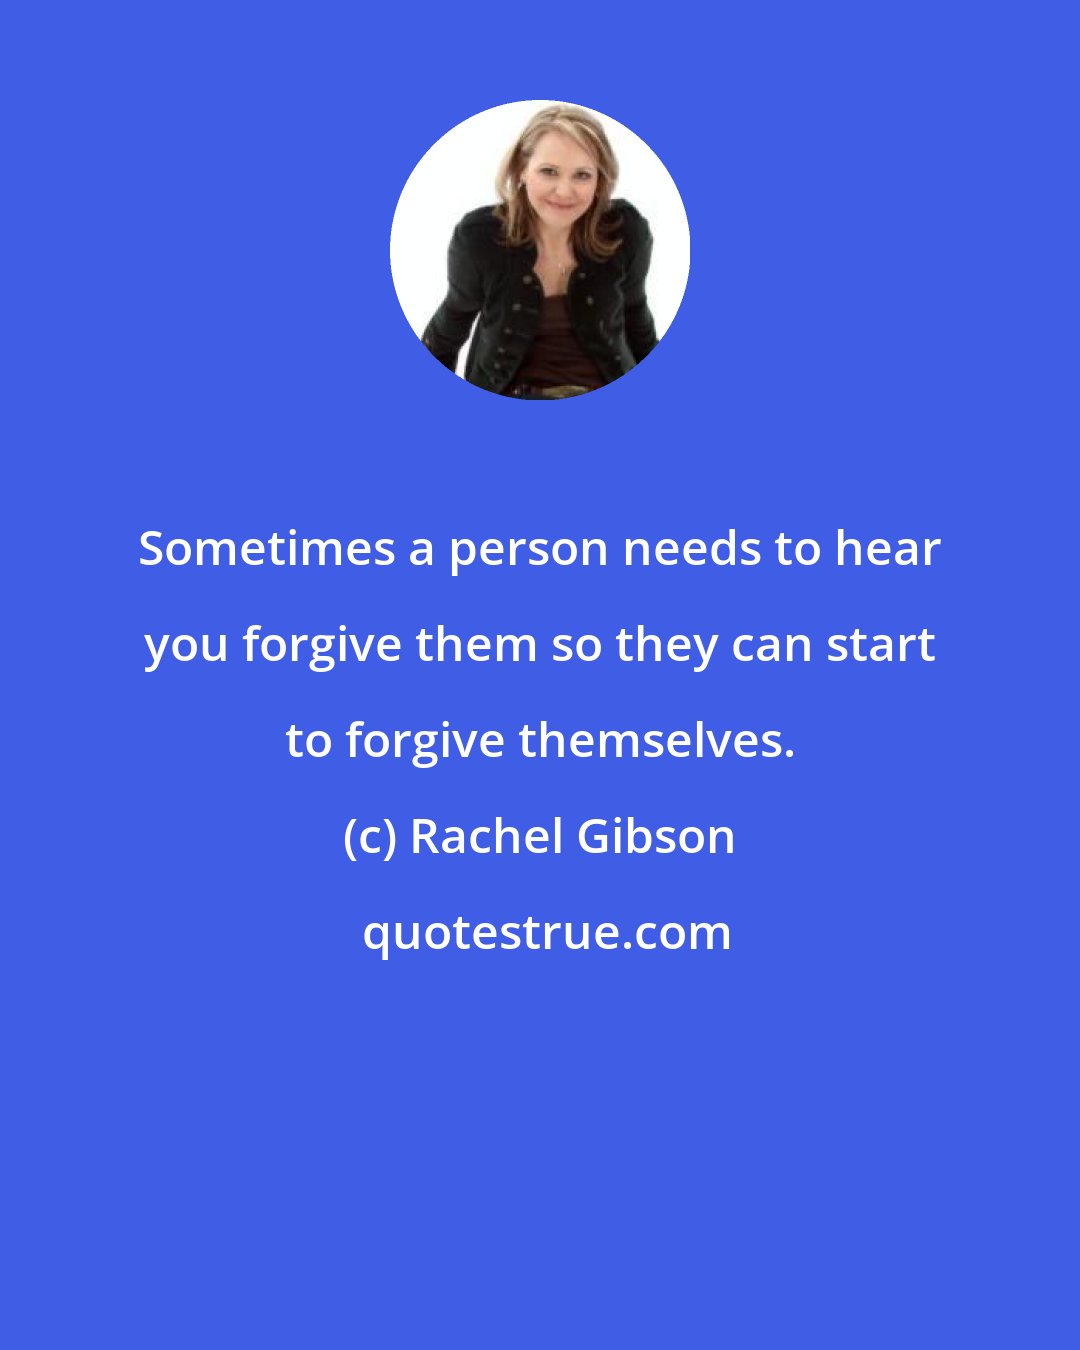 Rachel Gibson: Sometimes a person needs to hear you forgive them so they can start to forgive themselves.